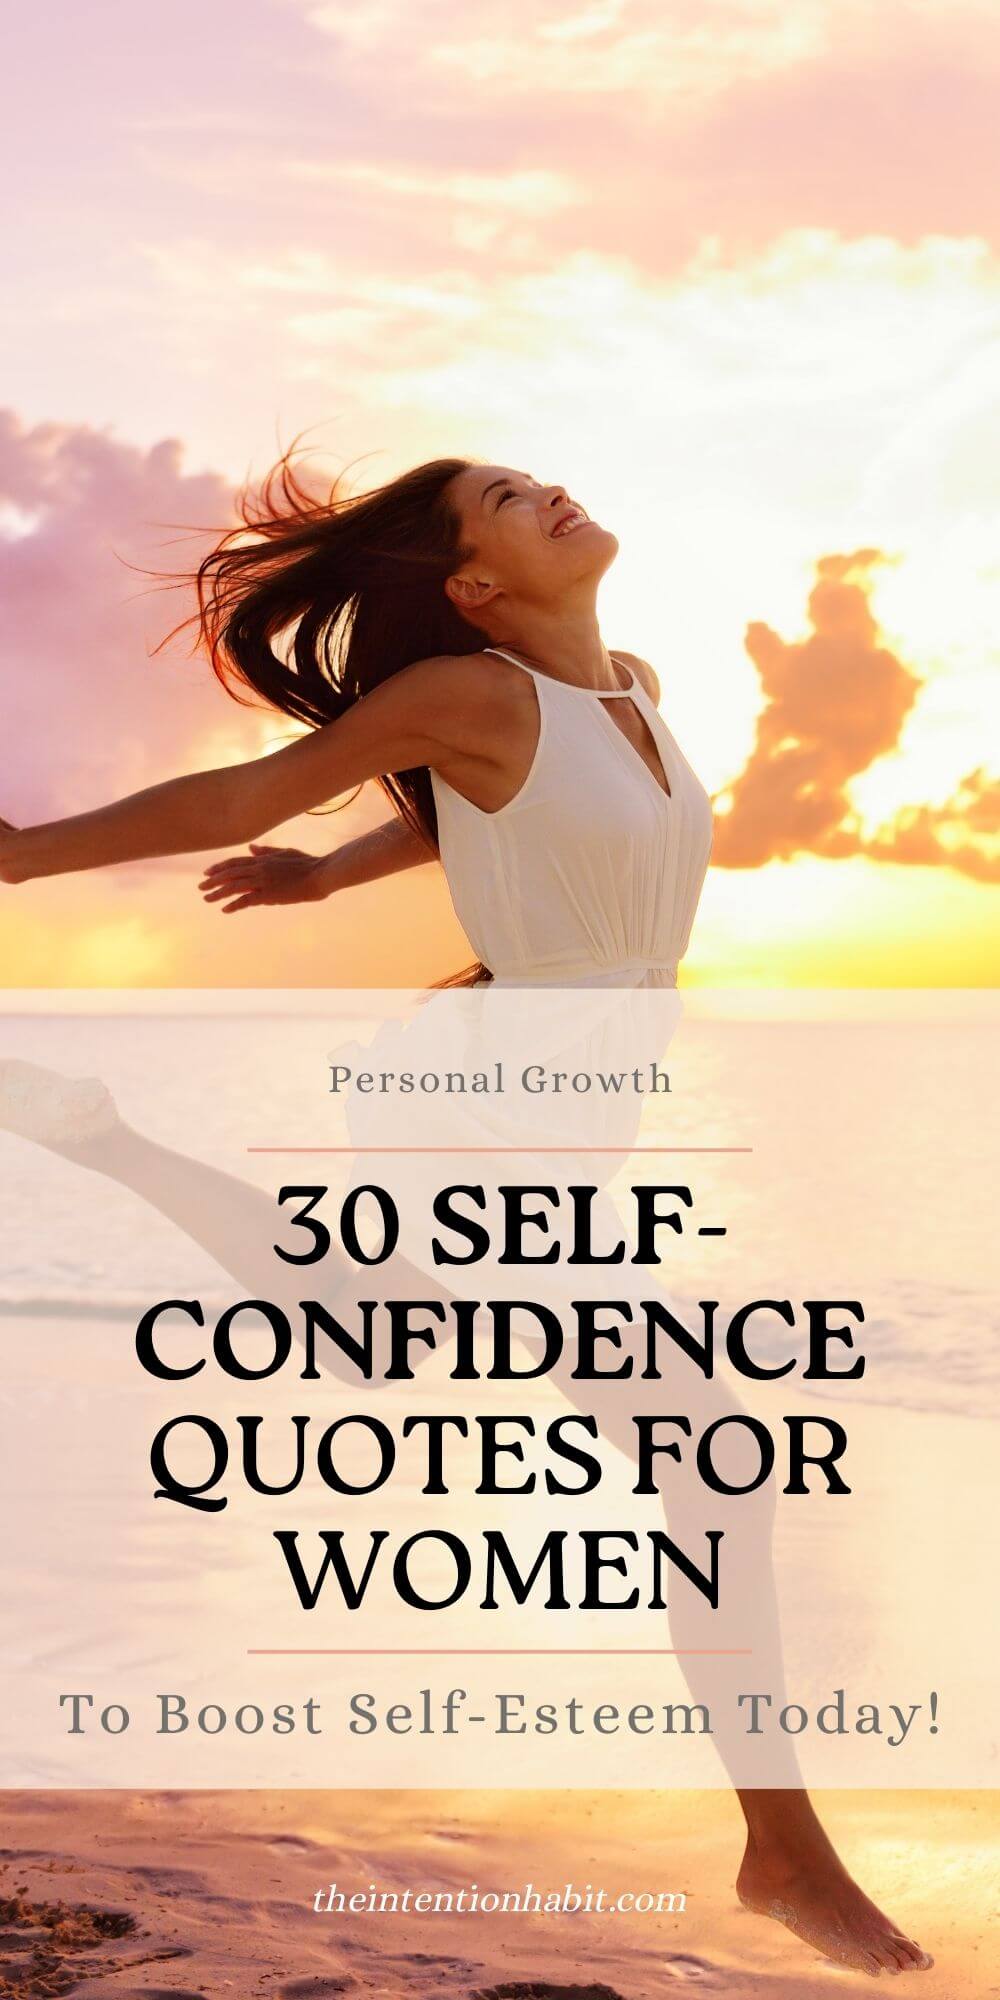 pinterest image of woman running on beach with text reading 30 self confidence quotes for women to boost your self esteem.